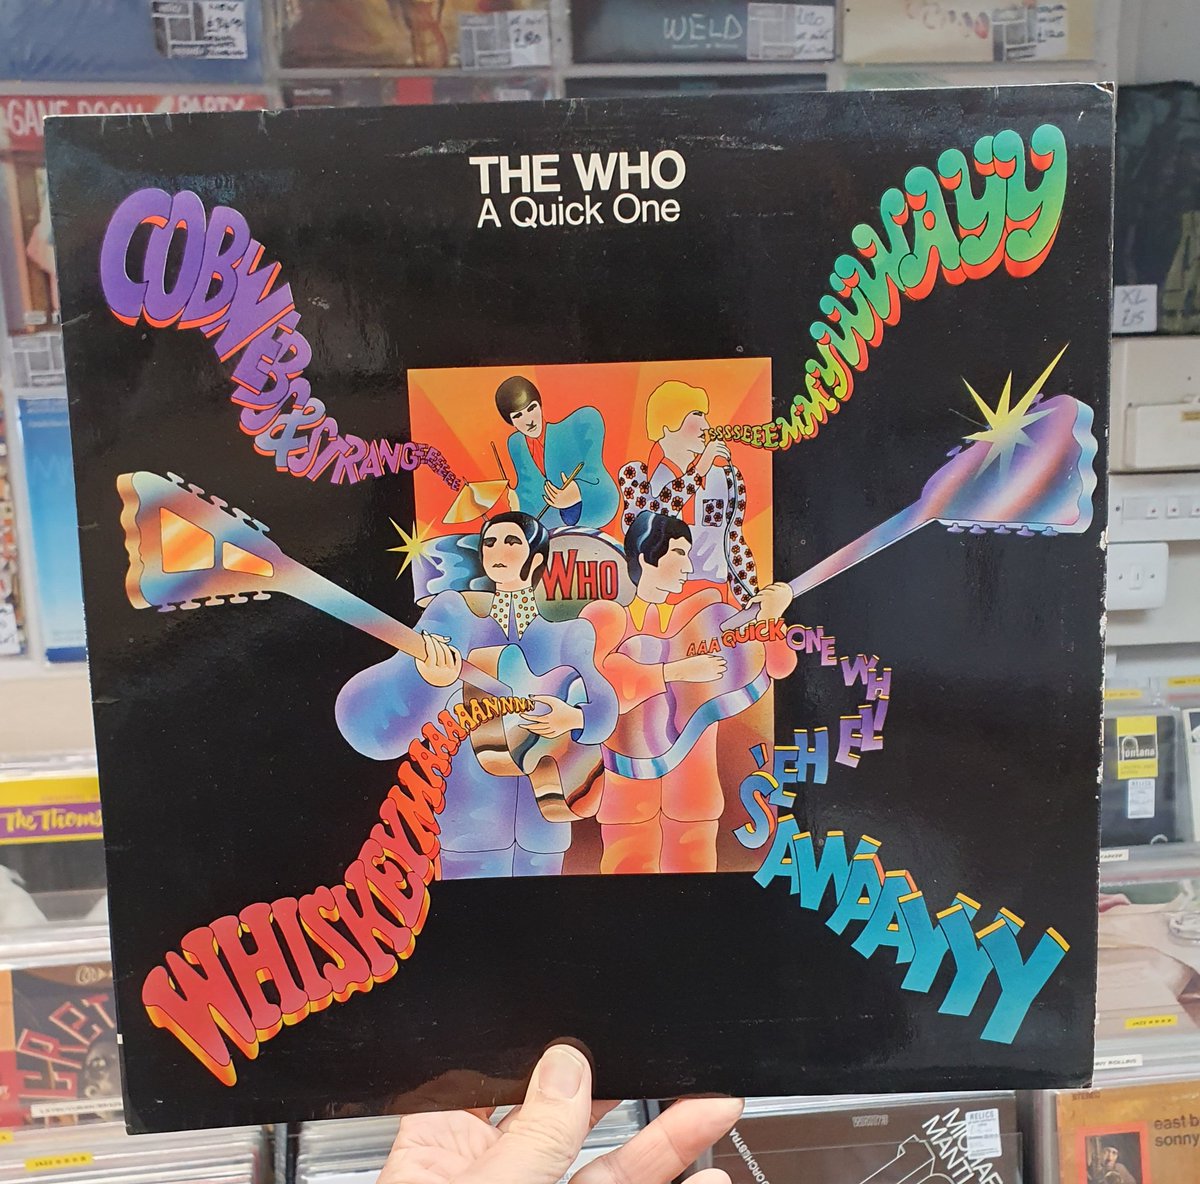 Lovely original Reaction copy of this iconic album.  
#TheWho #rarerecords #recordcollection #recordshop